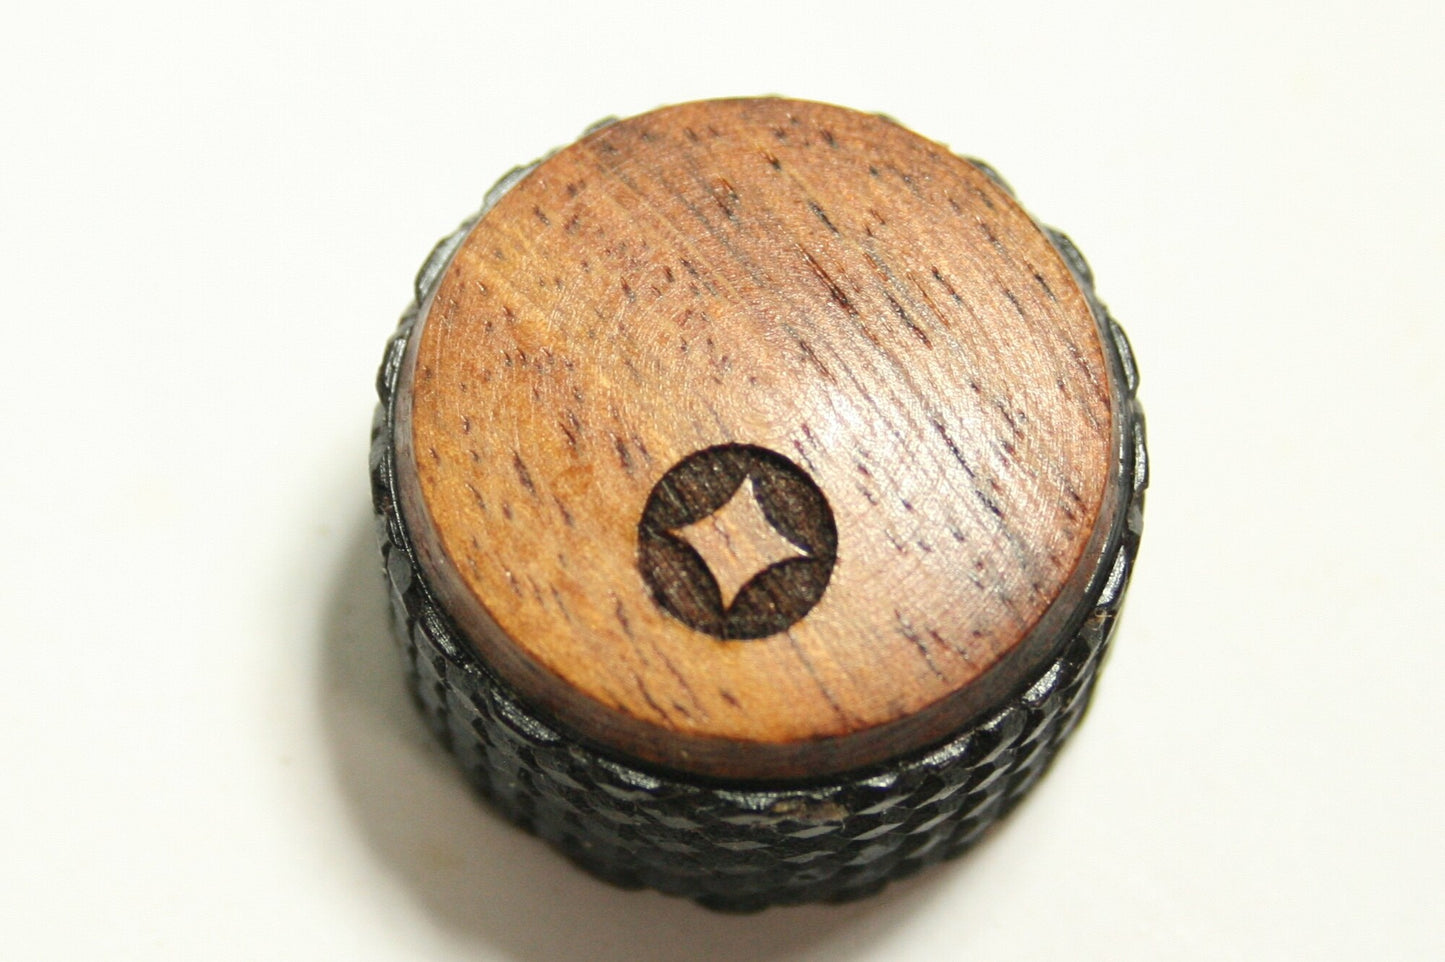 Guitar Knob: Knurled Ebony with Rosewood Cap and Laser Etched Dot (1 inch dia x 11/16 height)